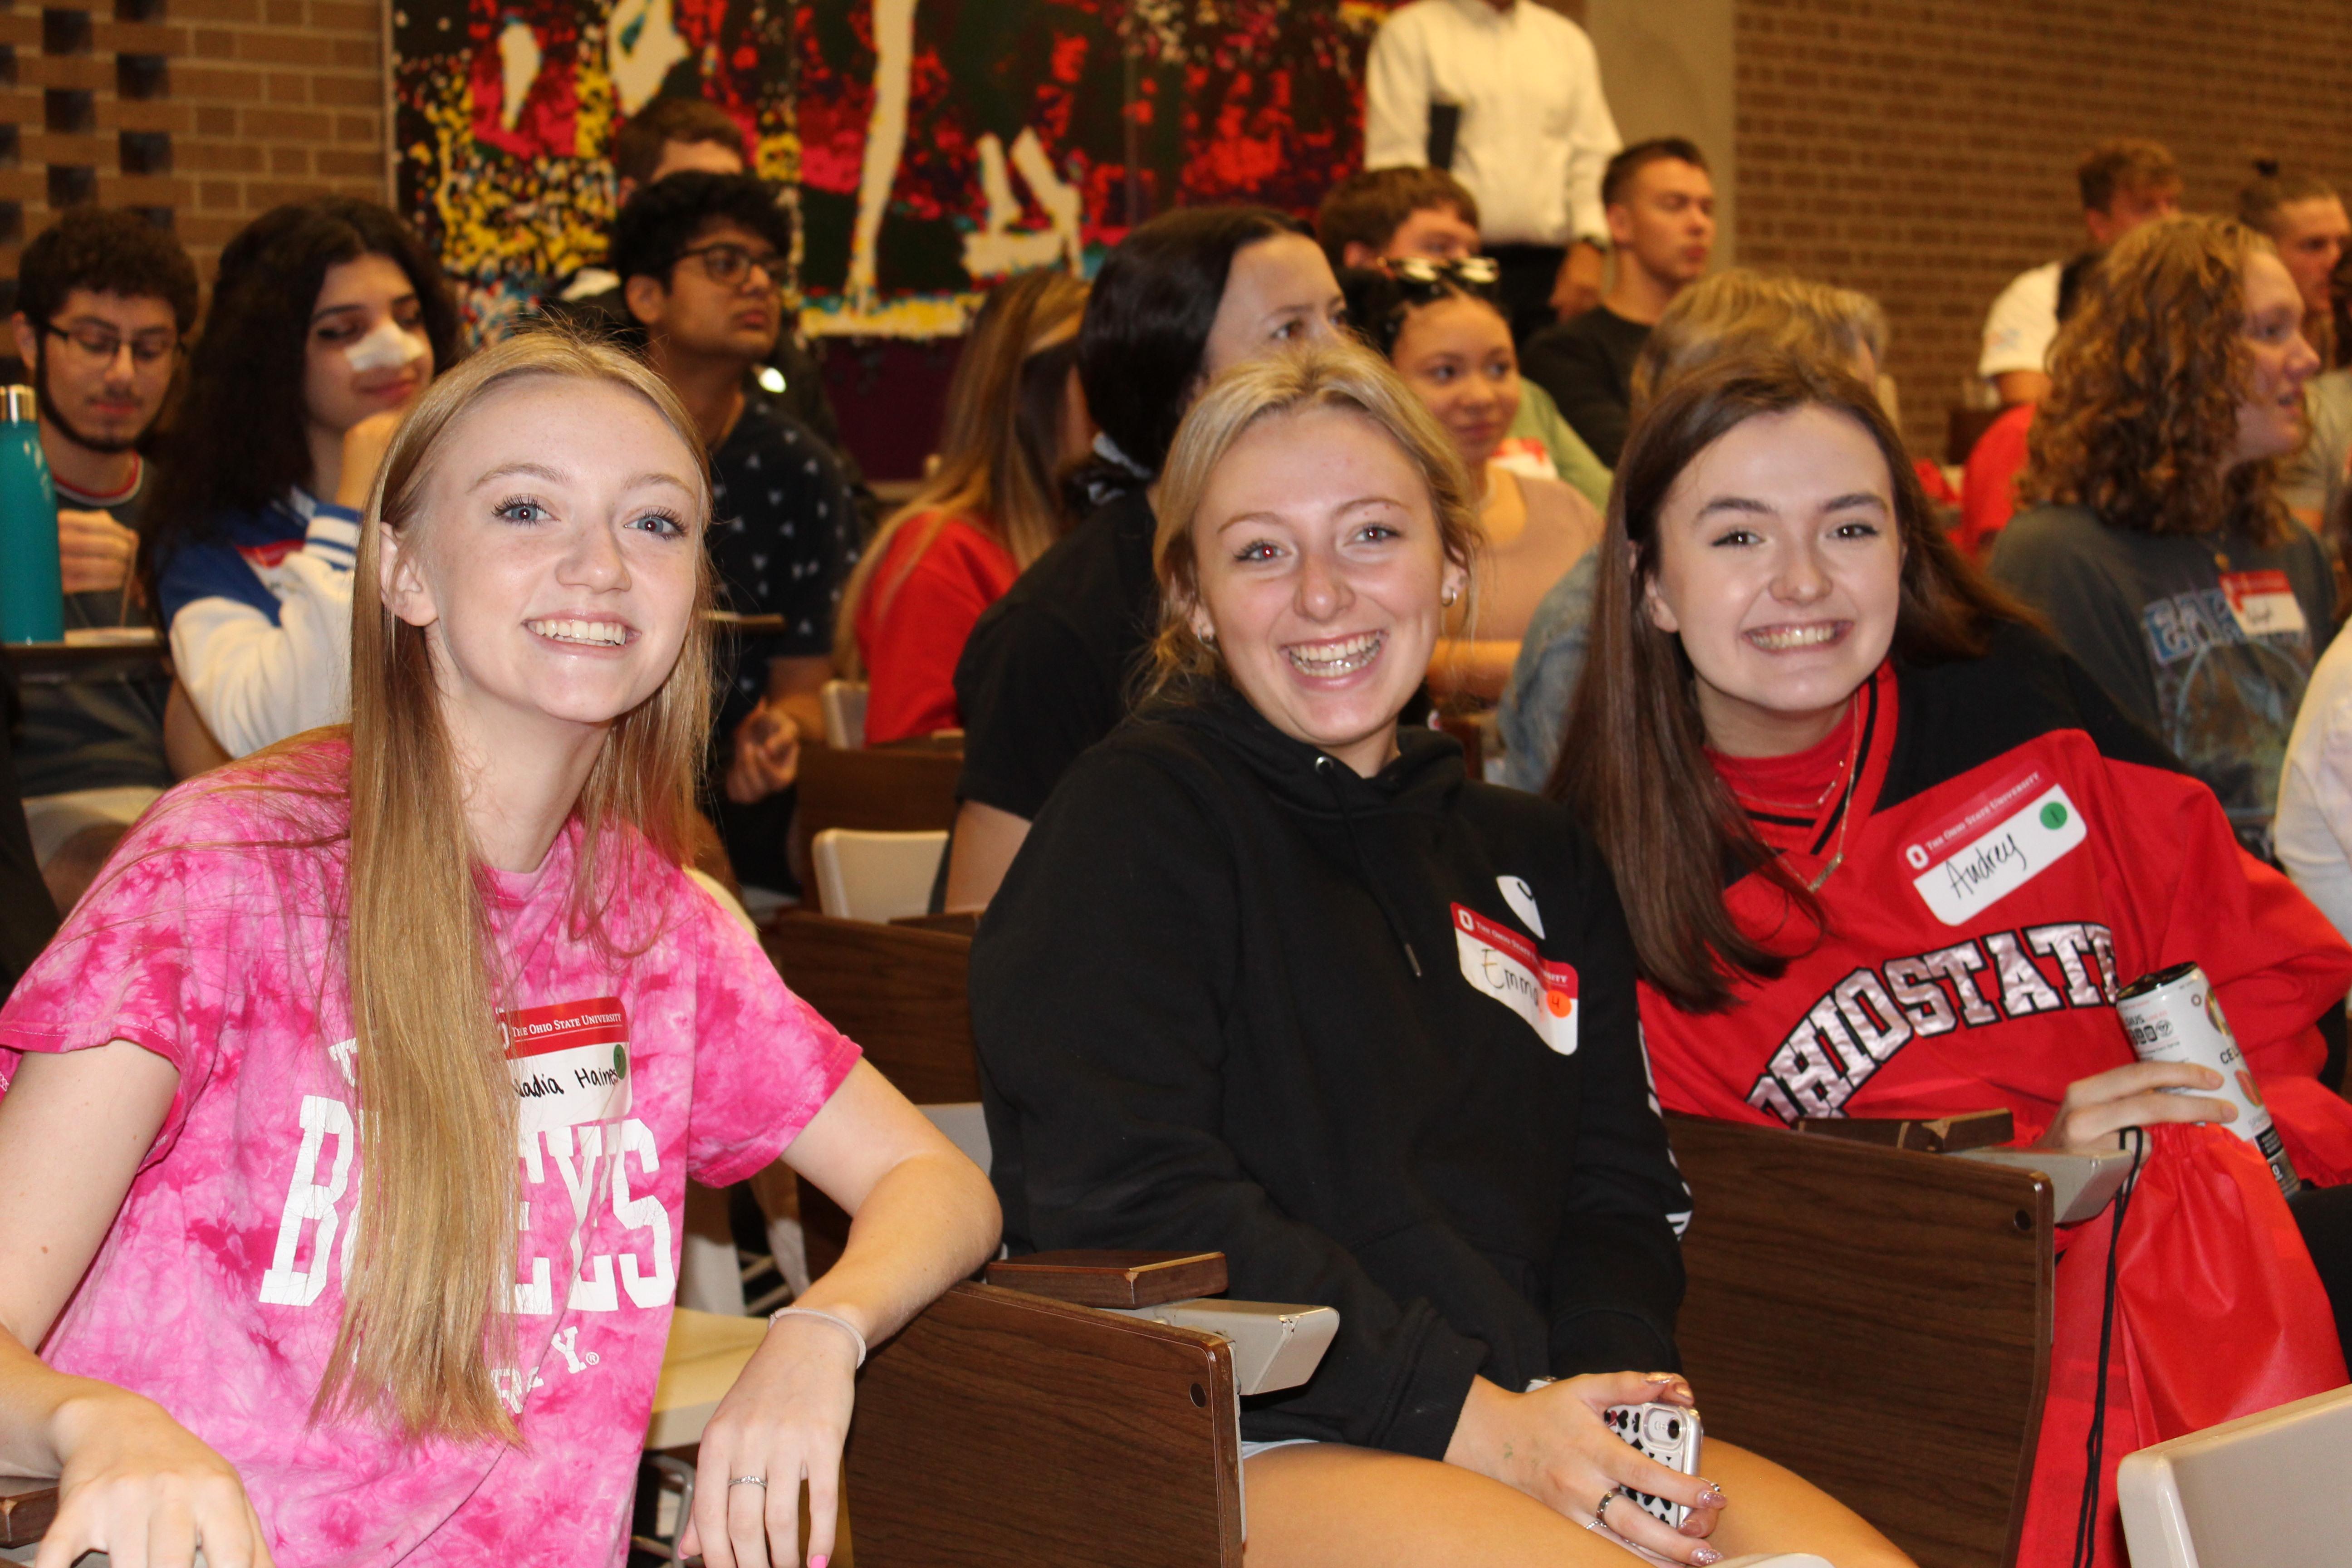 Three college women smiling for the camera